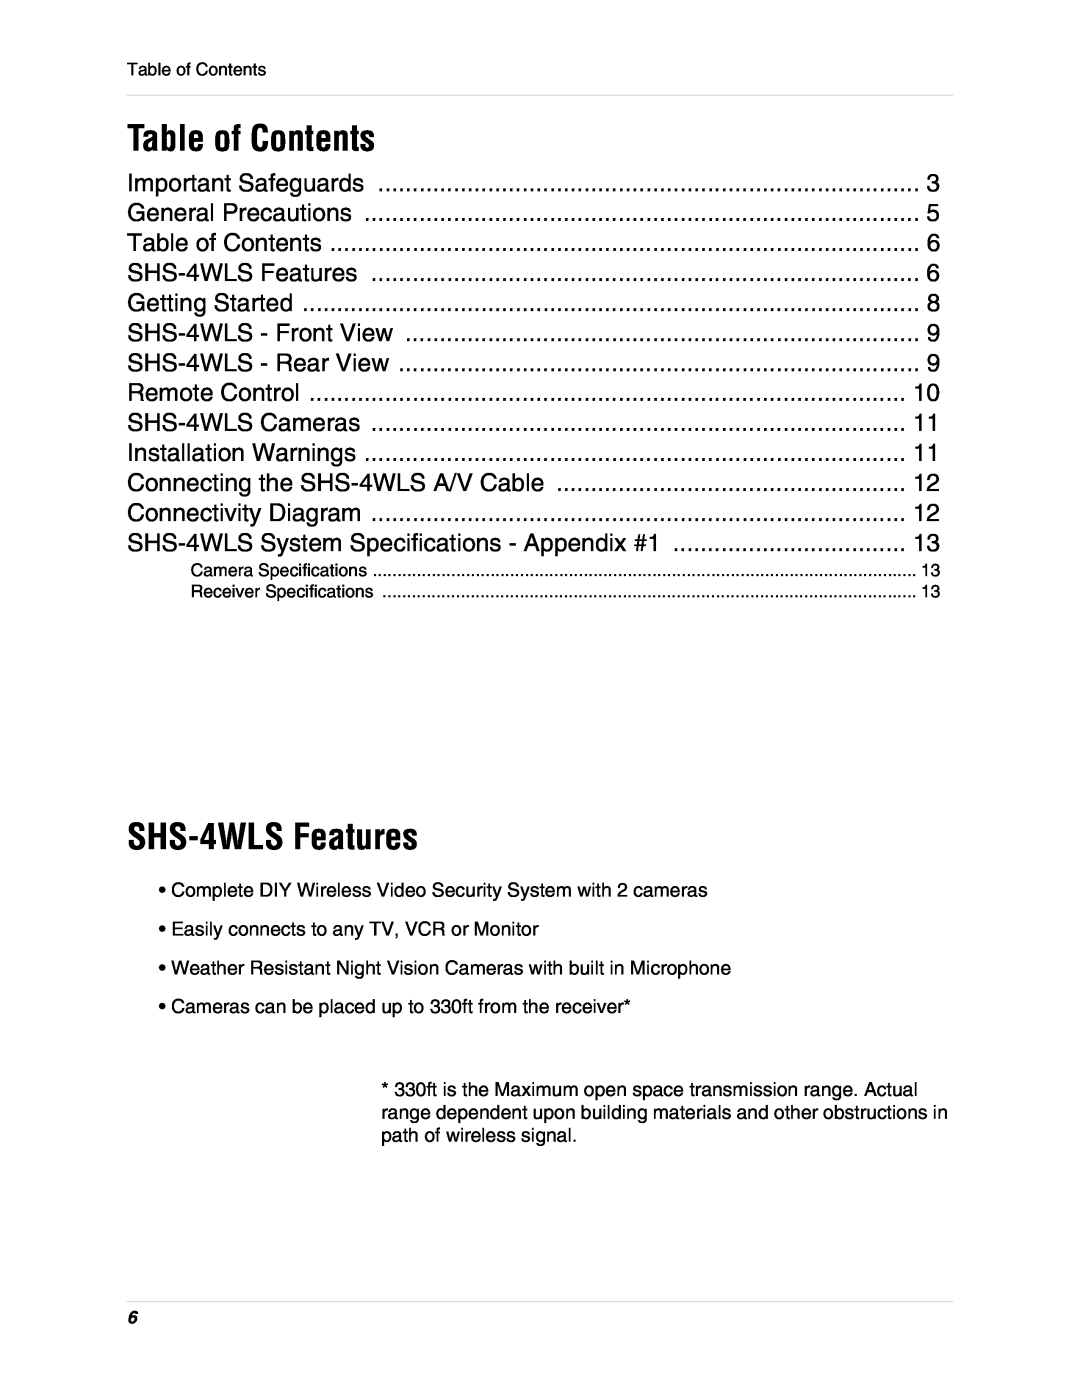 LOREX Technology instruction manual Table of Contents, SHS-4WLSFeatures 